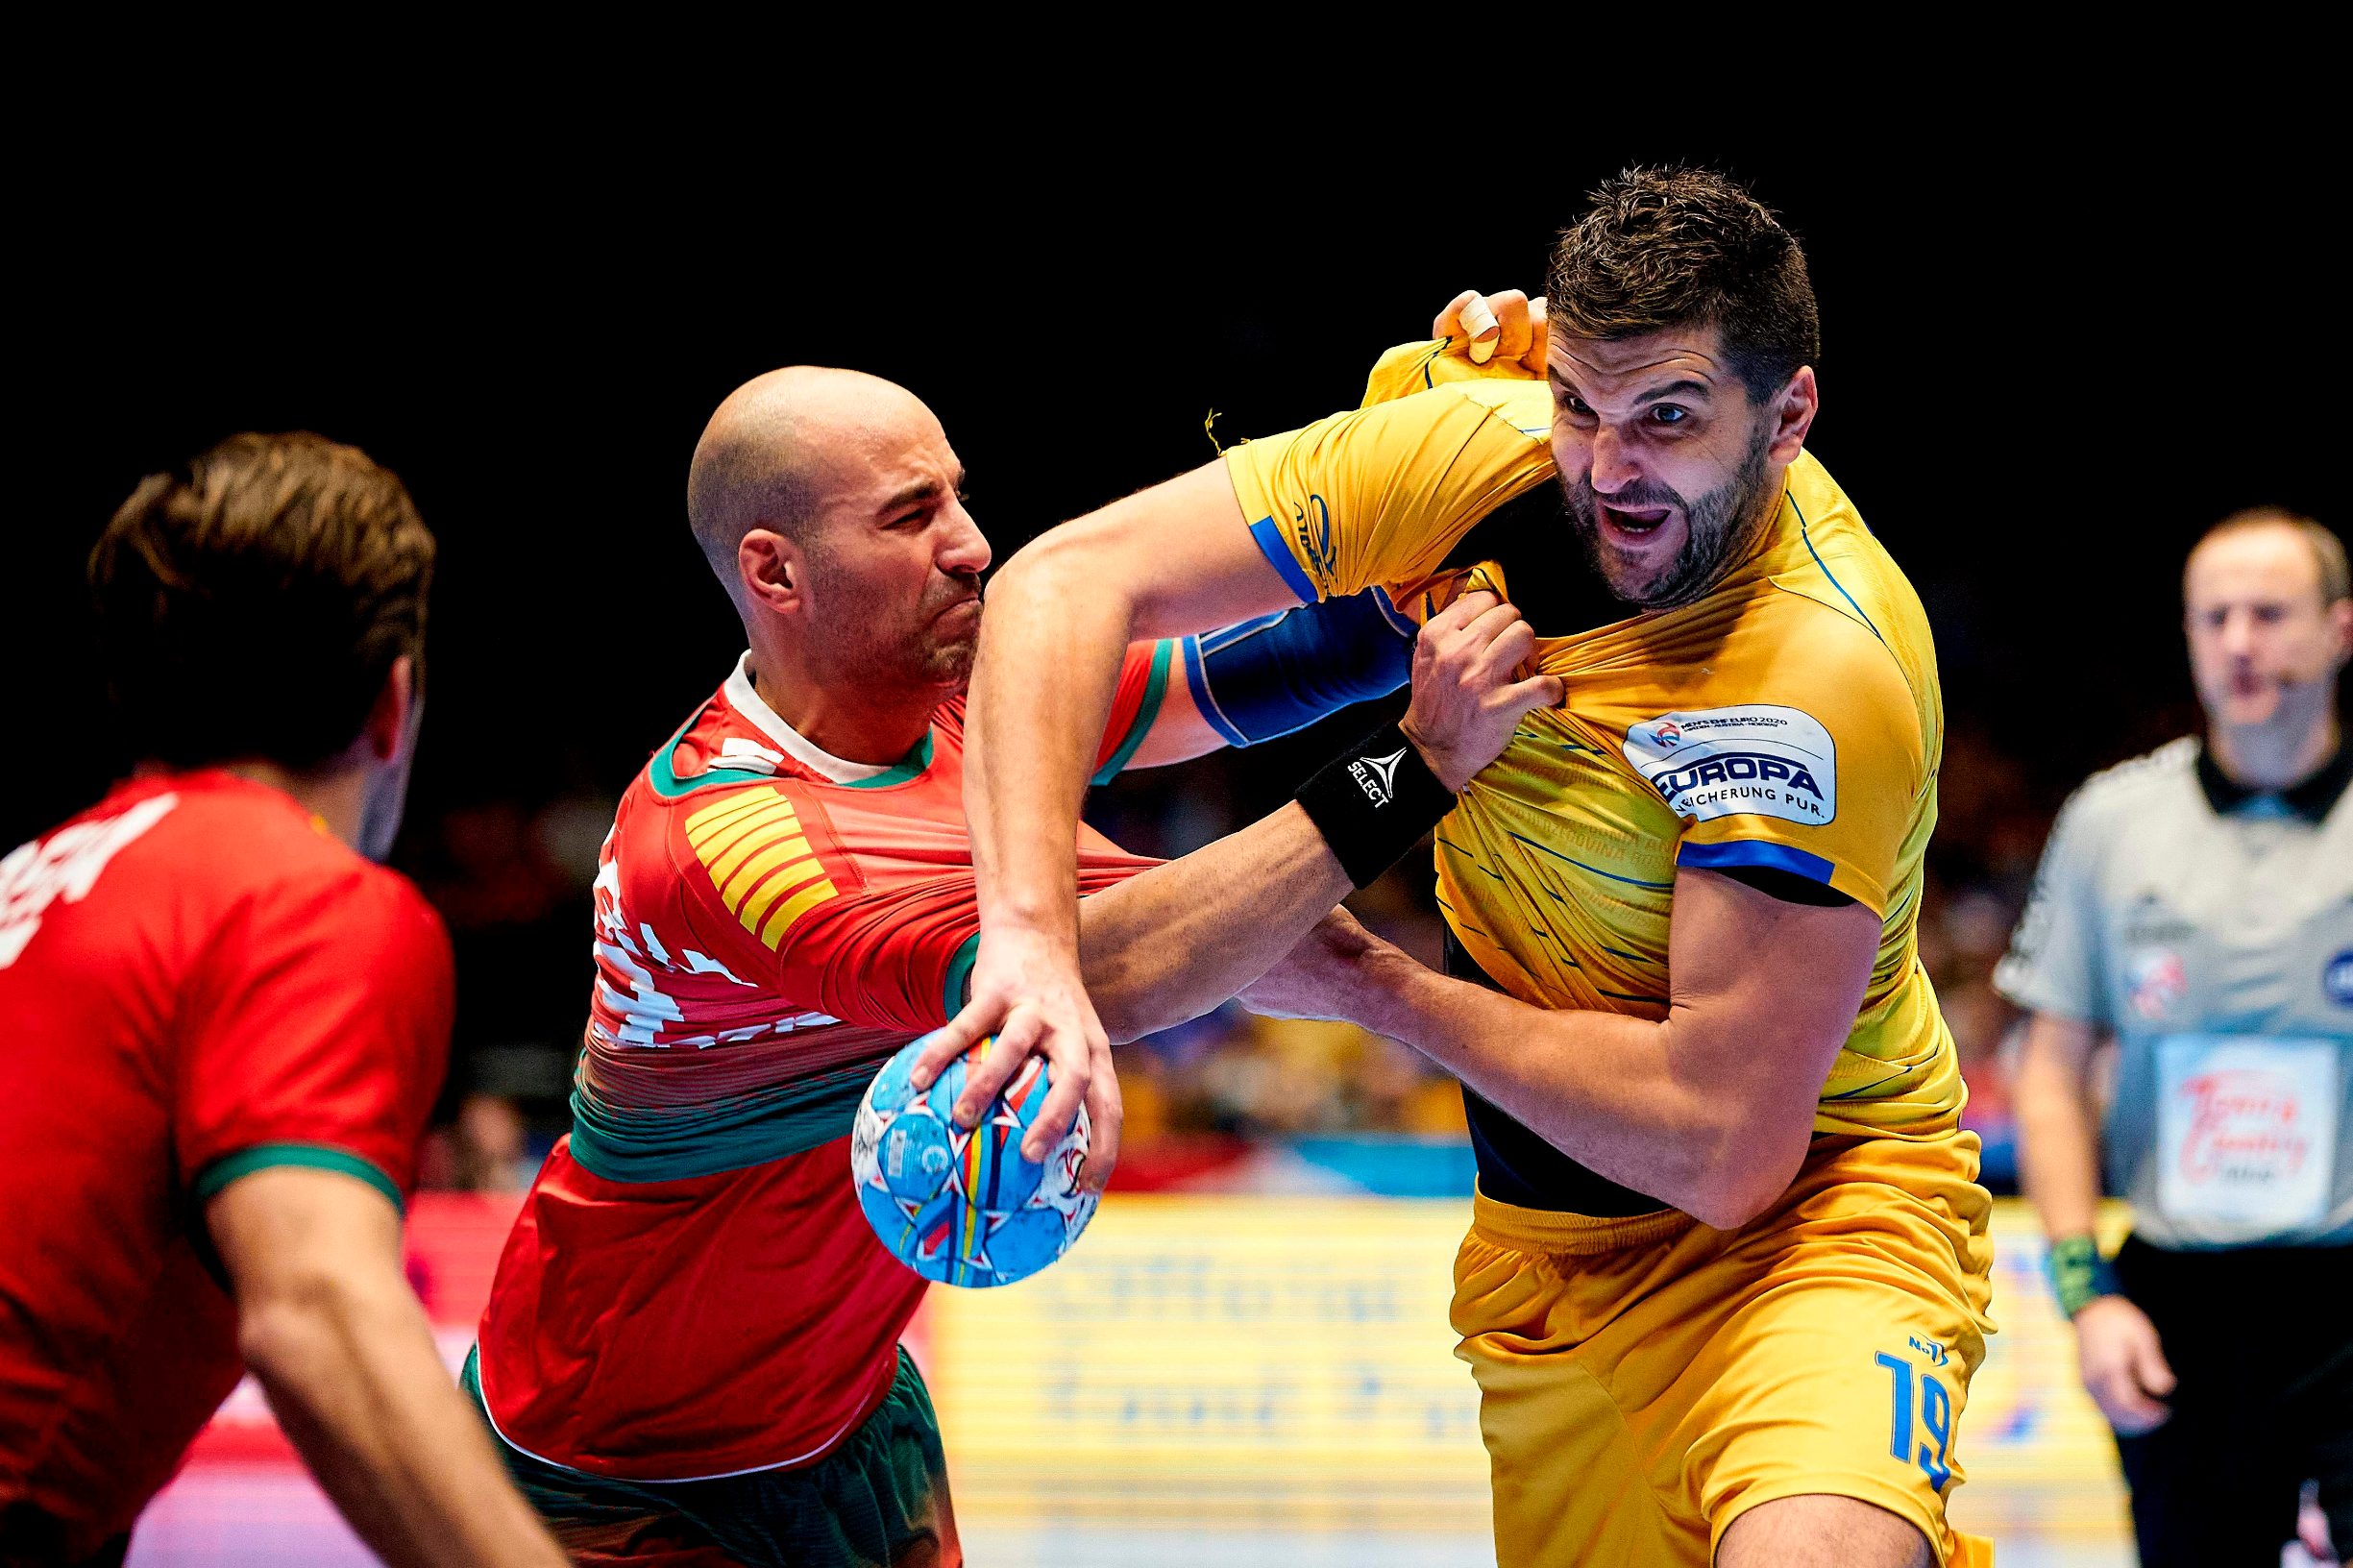 Bosnia and Herzegovina´s Marko Panic (R) and Portugal´s Alexandre Cavalcanti vie during the Men´s Handball European Championship preliminary round match Portugal v Bosnia and Herzegovina in Trondheim, Norway, on January 12, 2020. (Photo by Ole Martin Wold / various sources / AFP) / Norway OUT